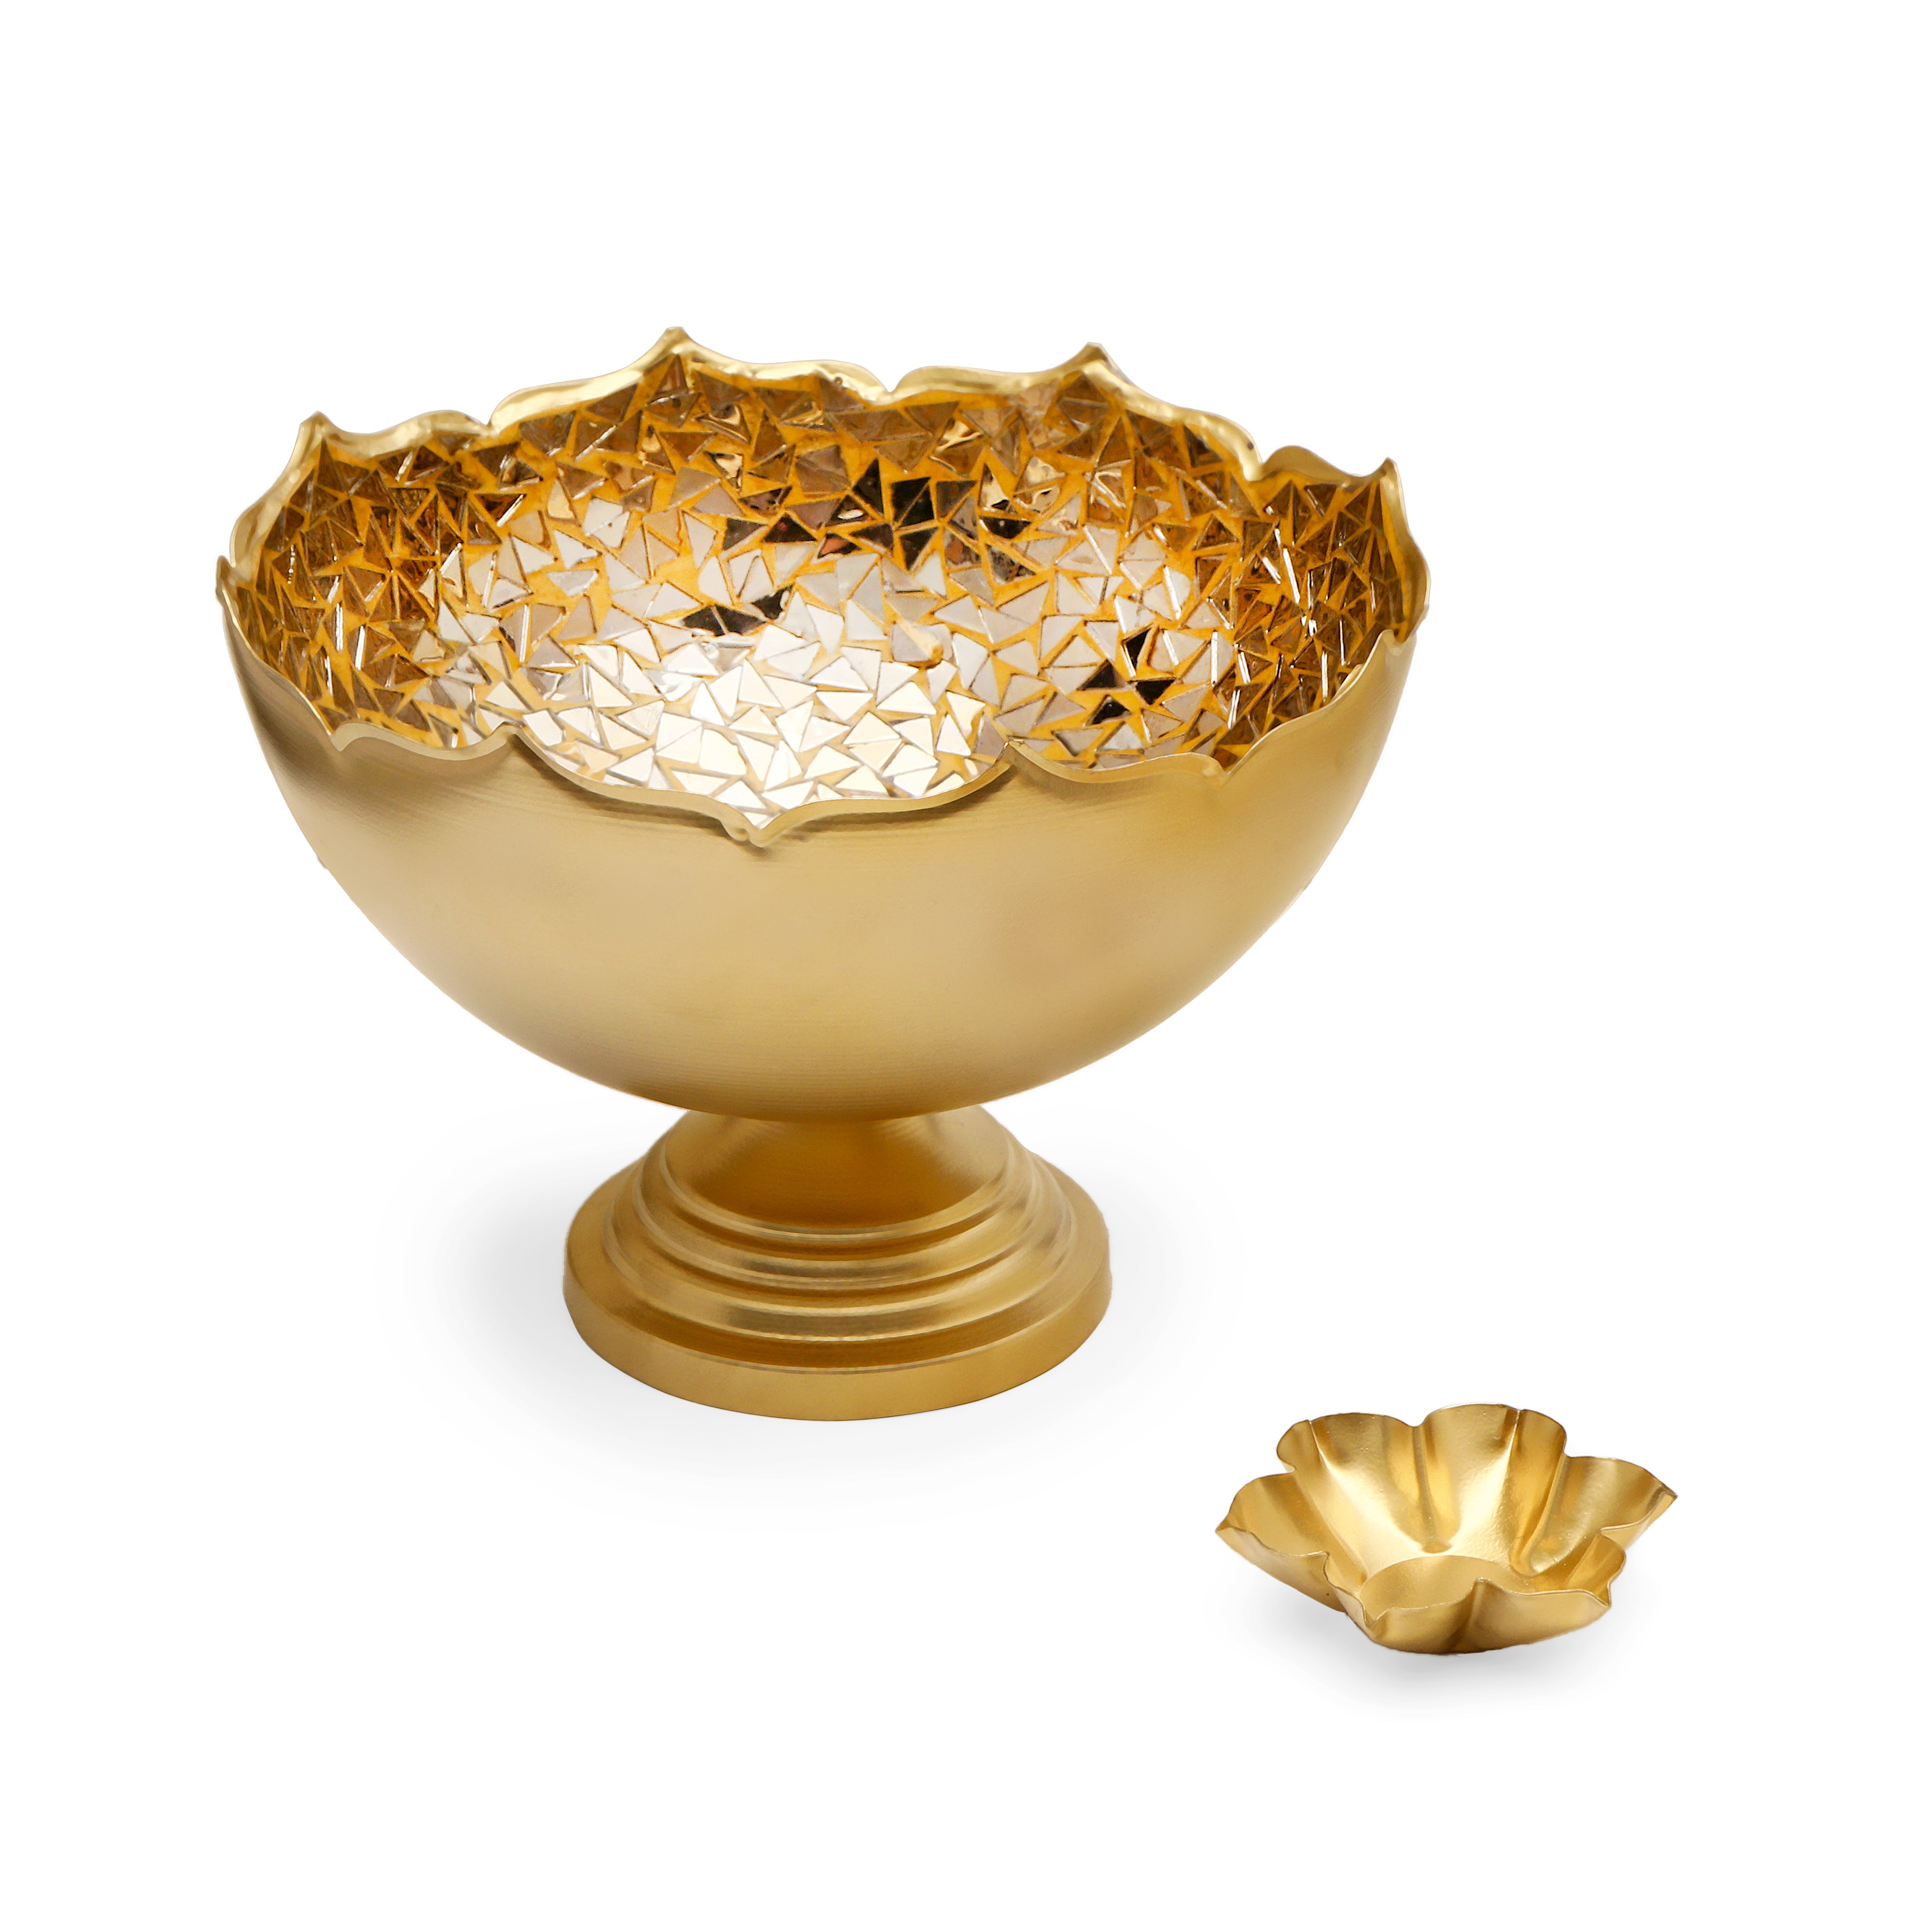 Gold Mosaic Urli with Stand 10.5" Inch (Medium) - The Home Co.